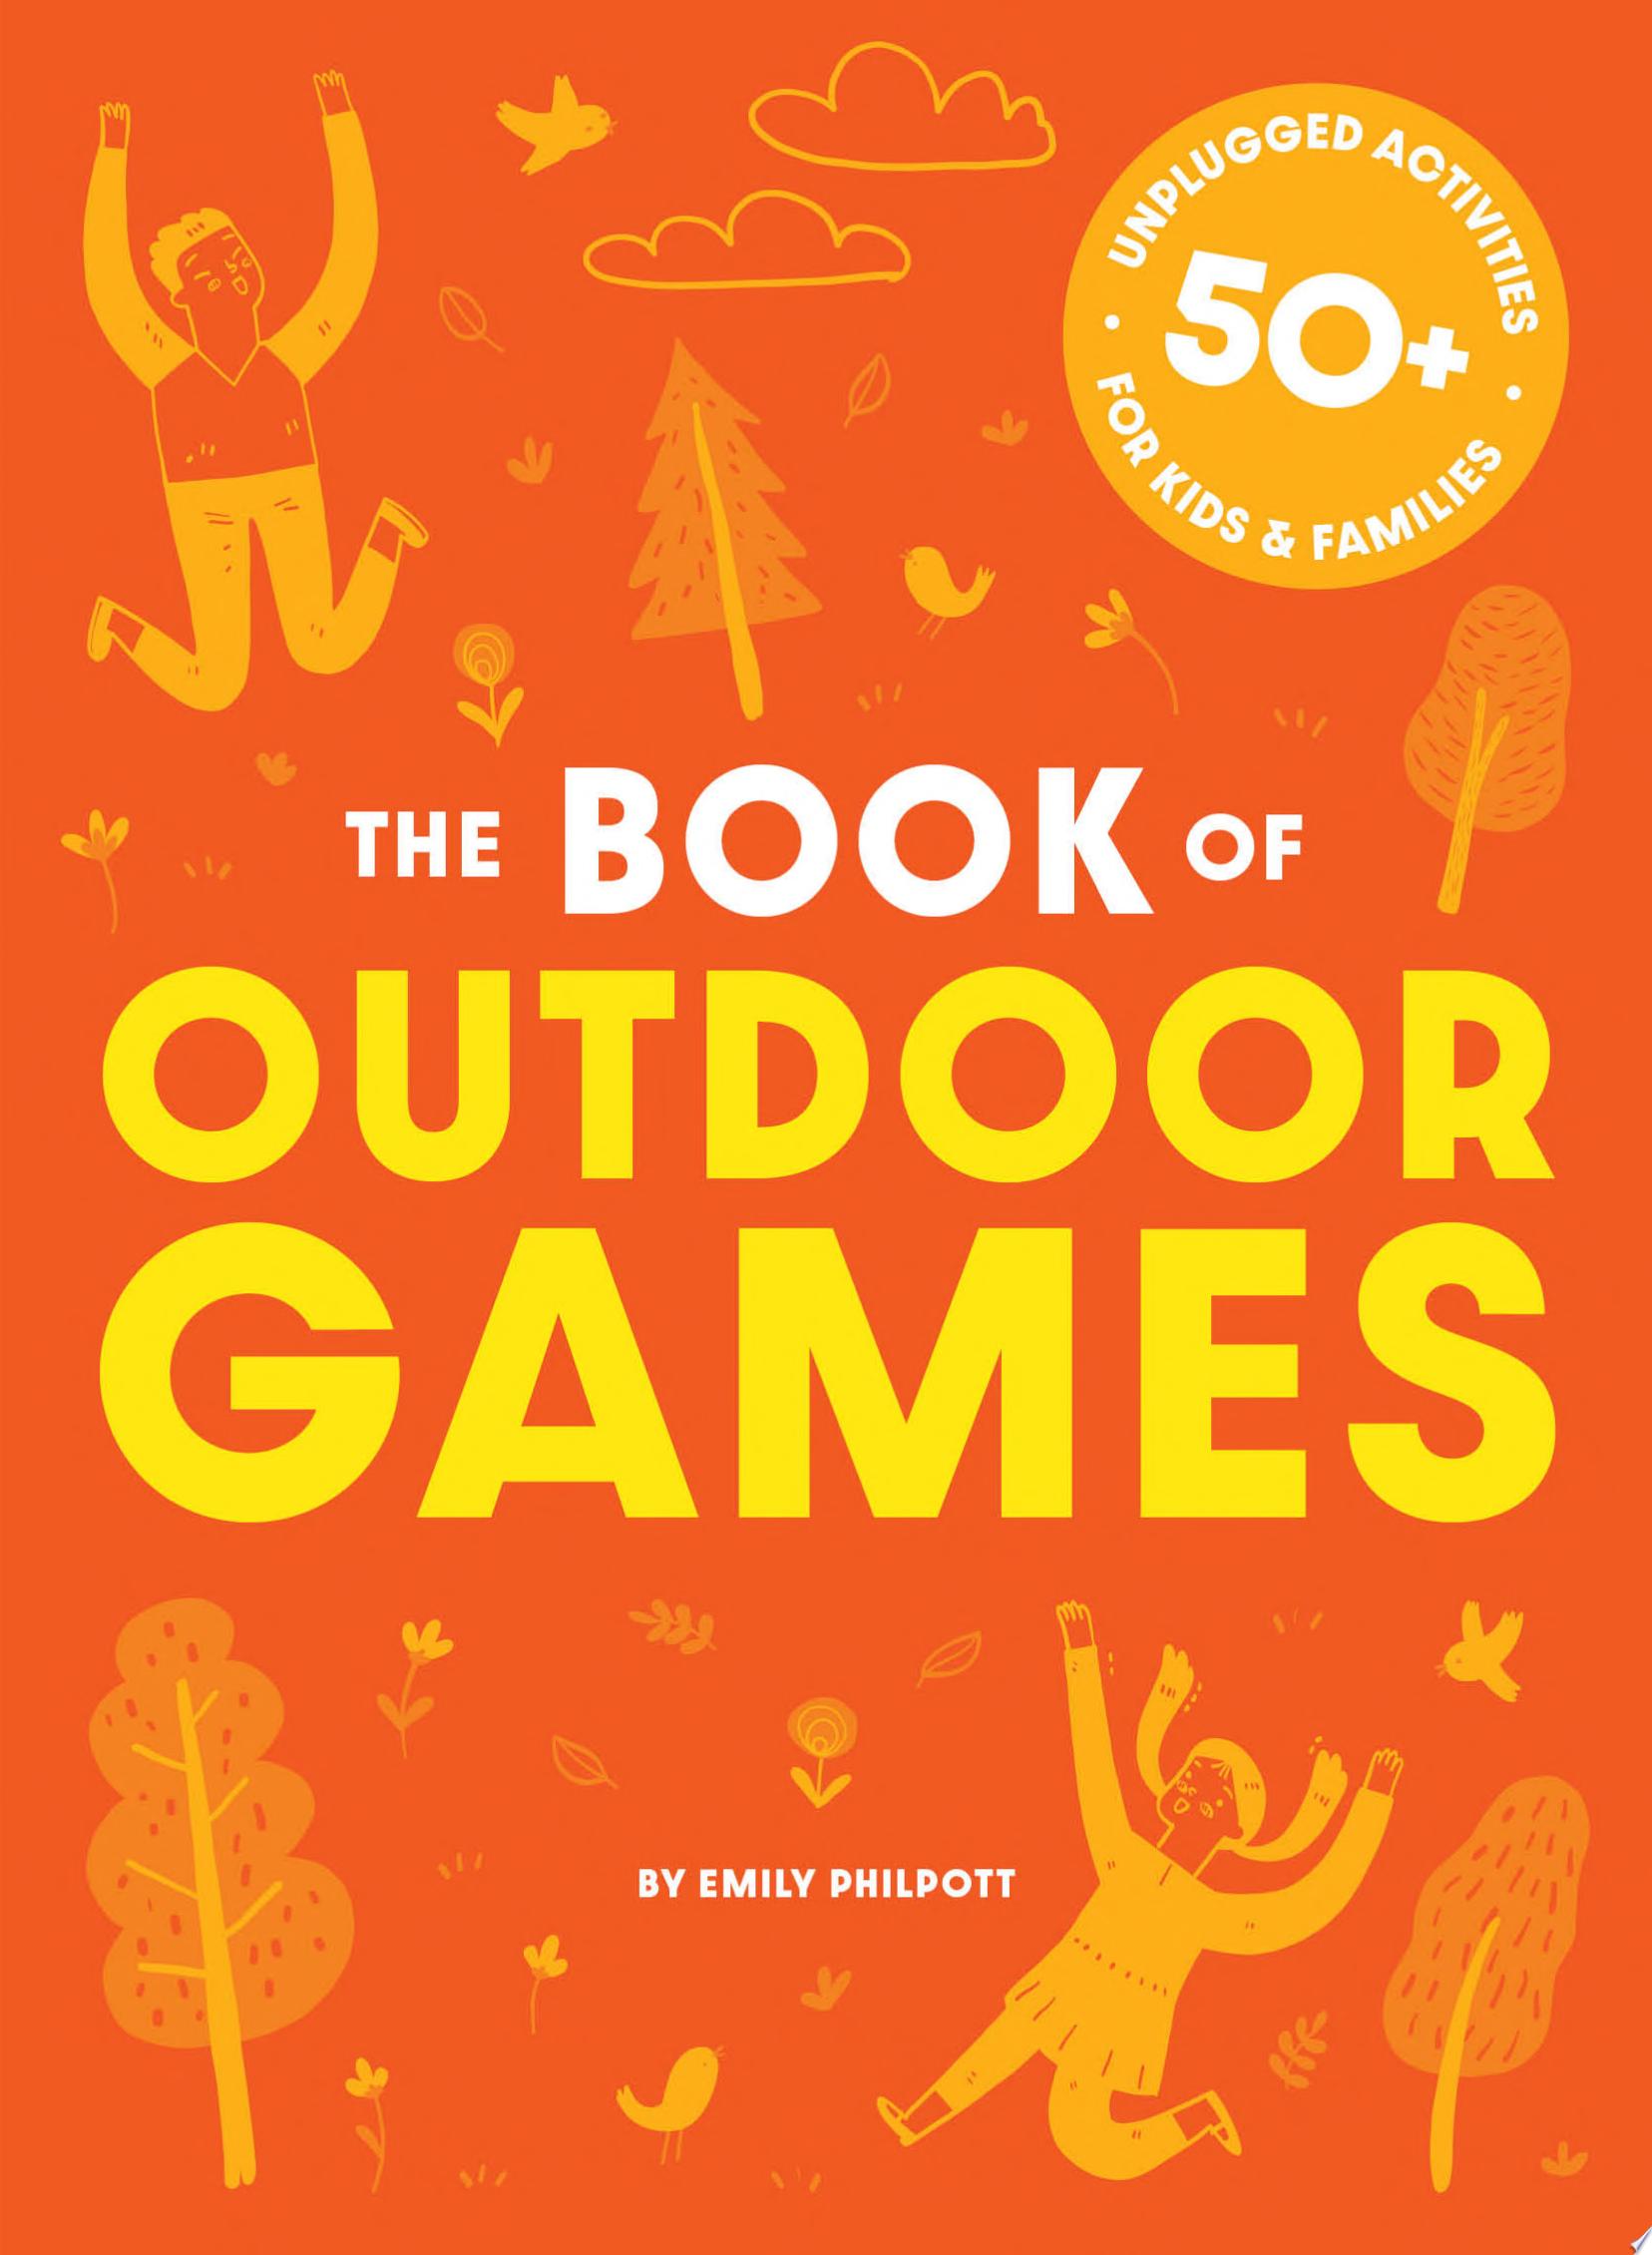 Image for "The Book of Outdoor Games"